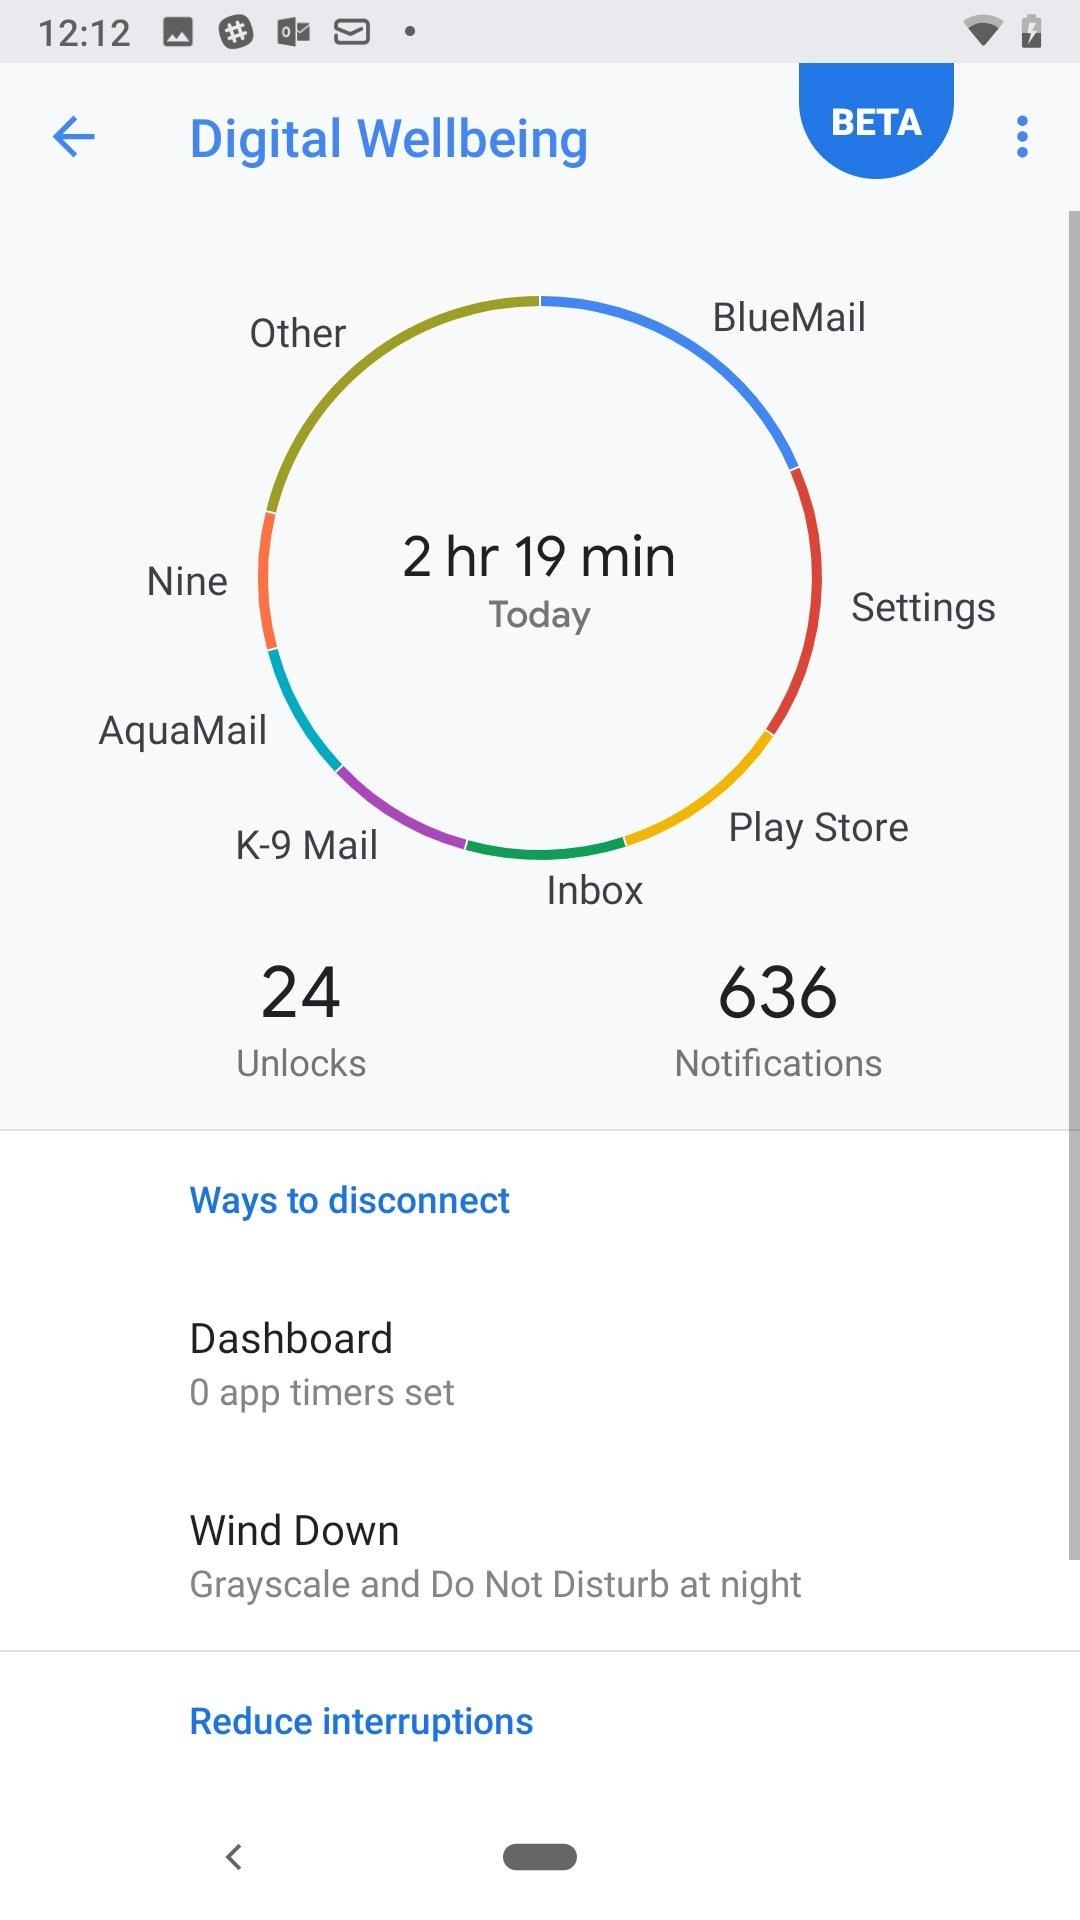 How to Set Up Digital Wellbeing in Android Pie to Curb Your Smartphone Usage